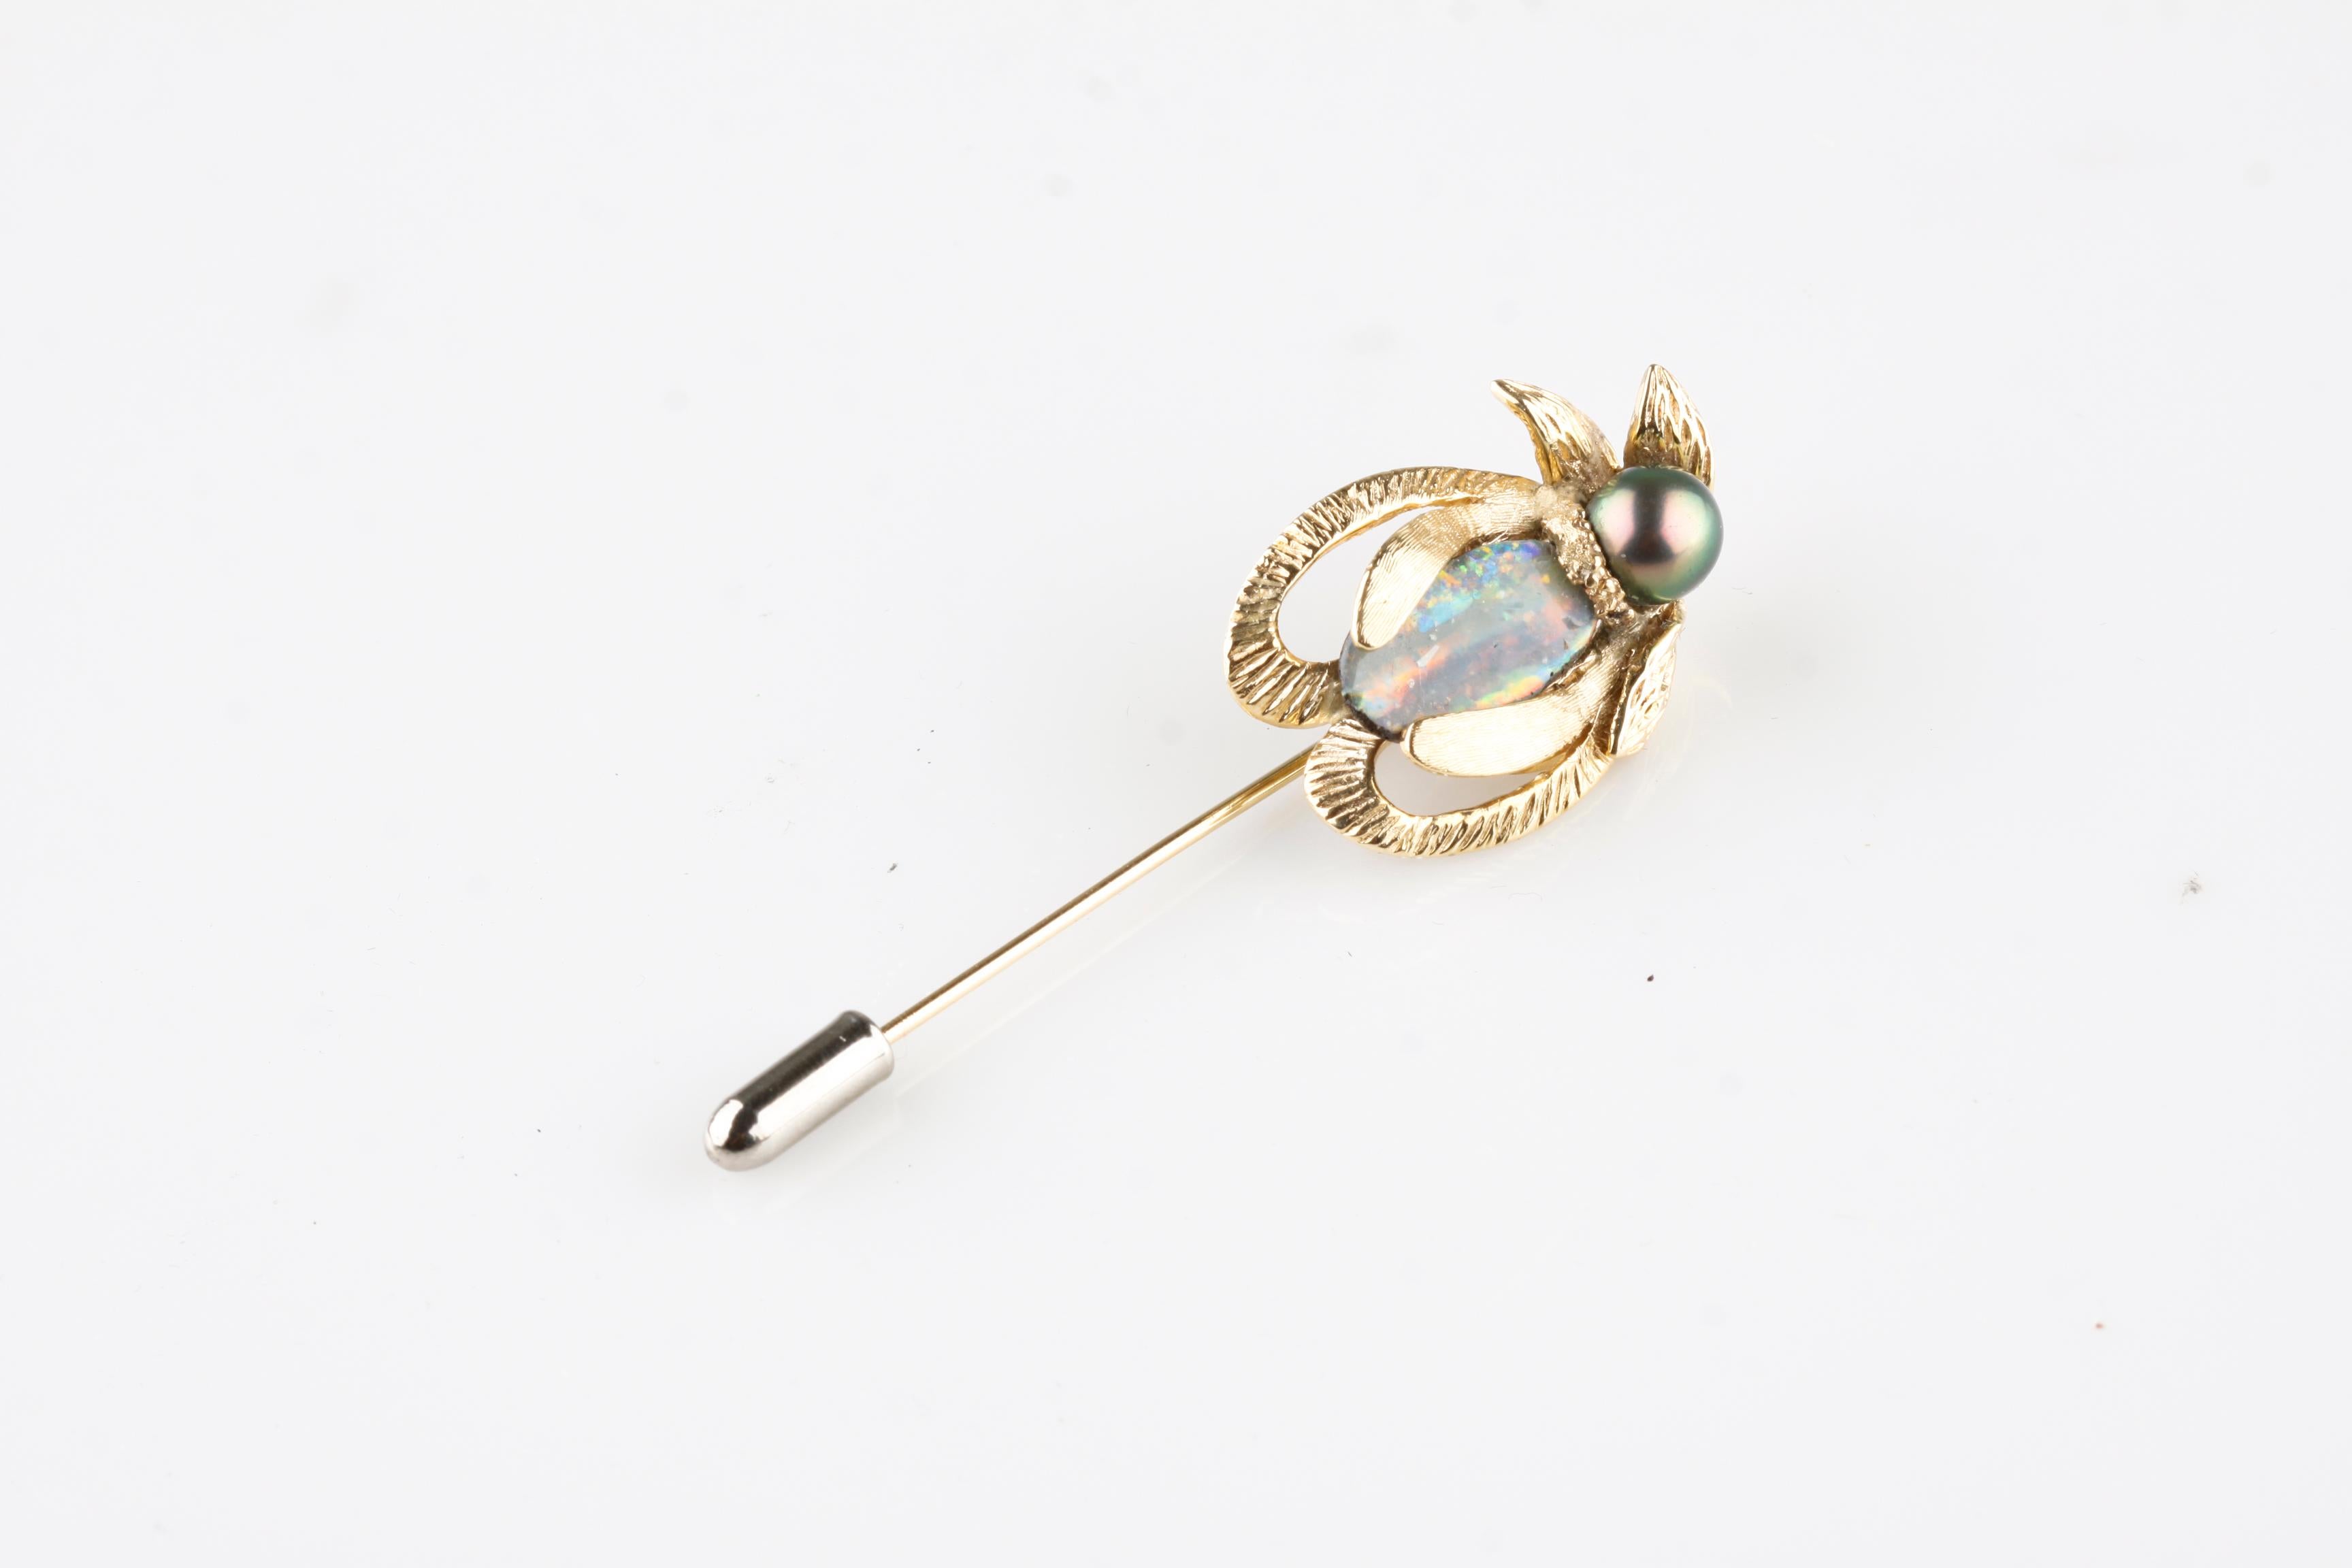 Opal Stick Pin - 13 For Sale on 1stDibs